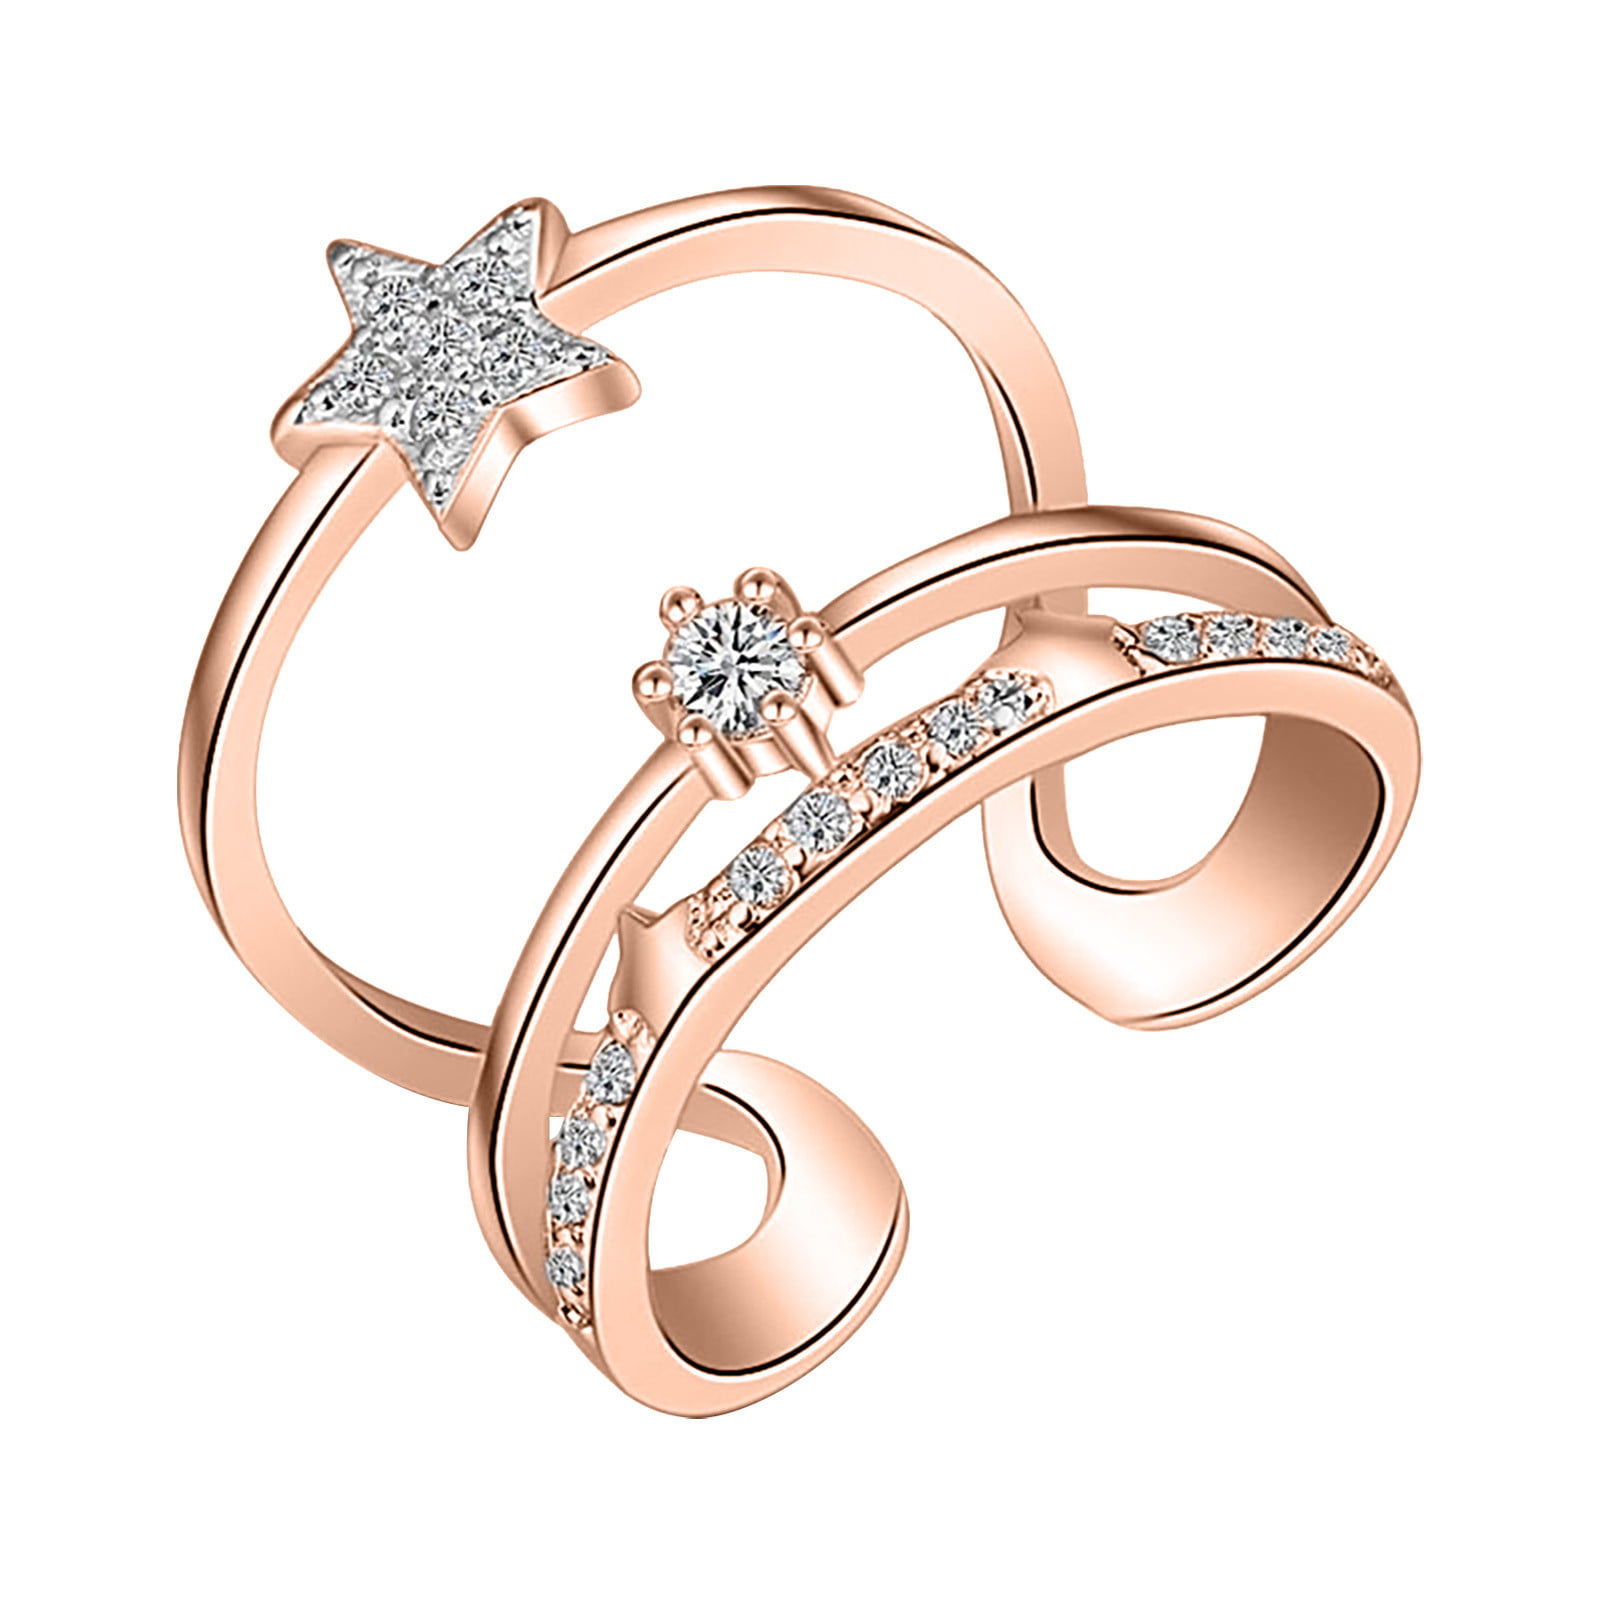 Jewelry Rings Jewelry Accessories Adjustable Ring Engagement Rings Fashion Women  Rings - Walmart.com